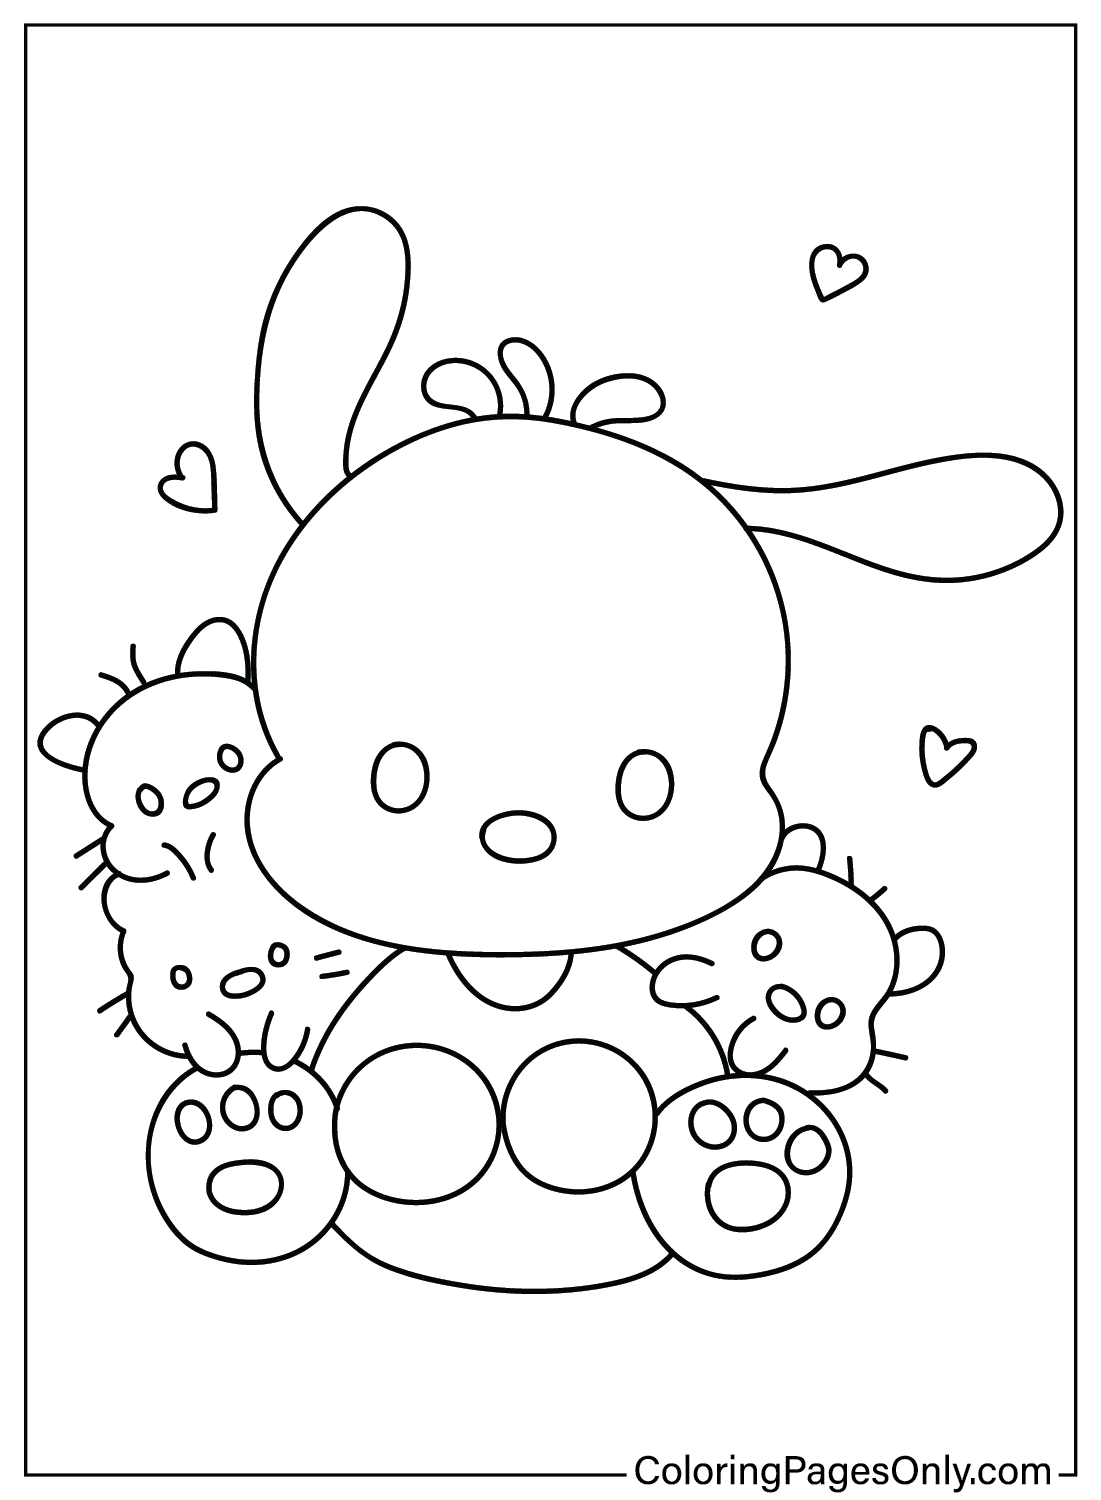 Pochacco Color Page - Free Printable Coloring Pages